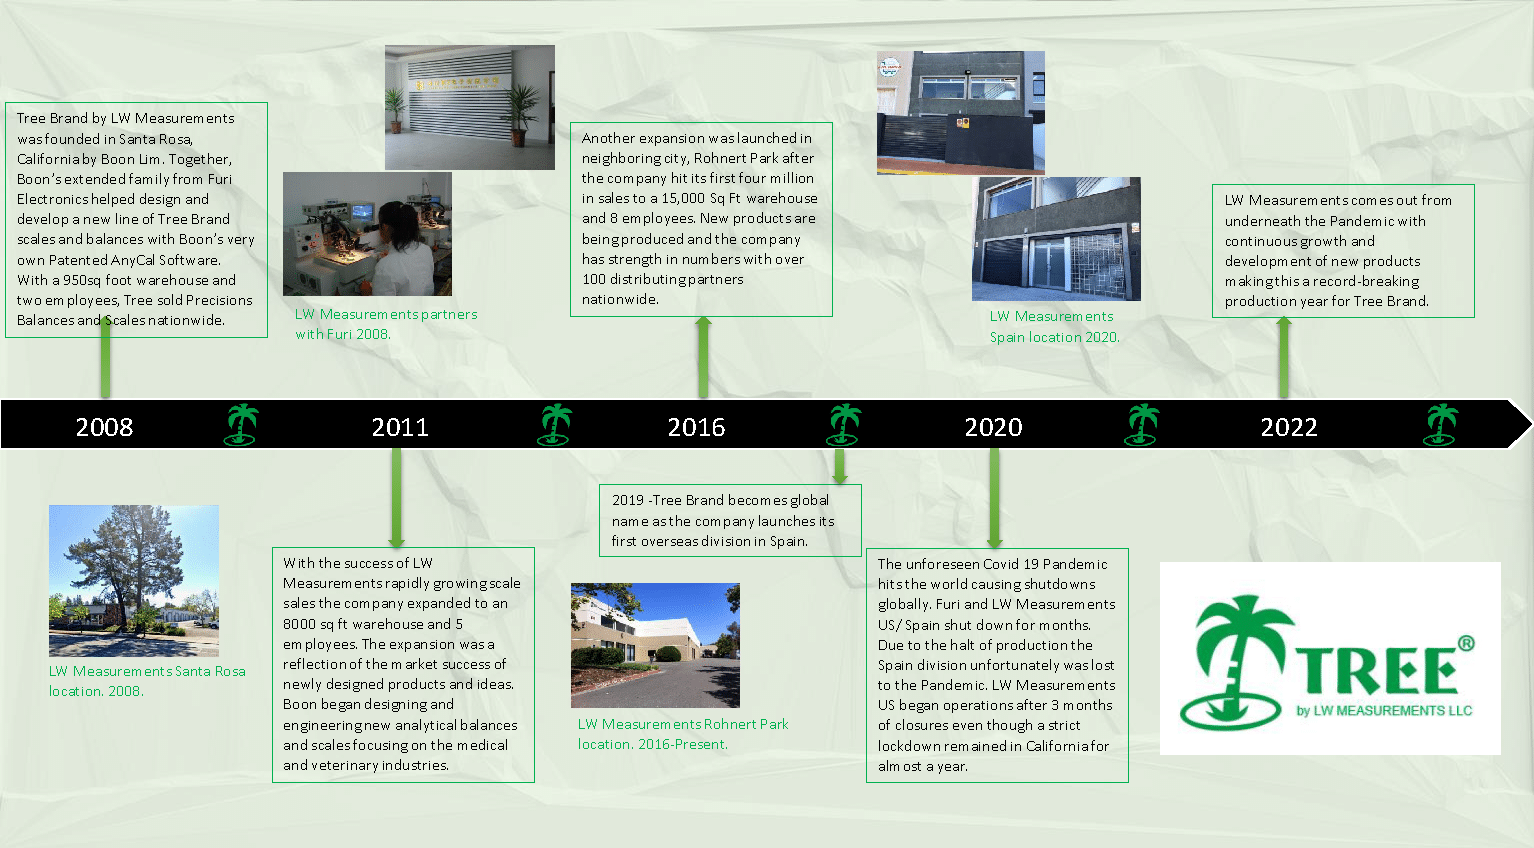 LW Measurements company timeline starting in 2008 until now